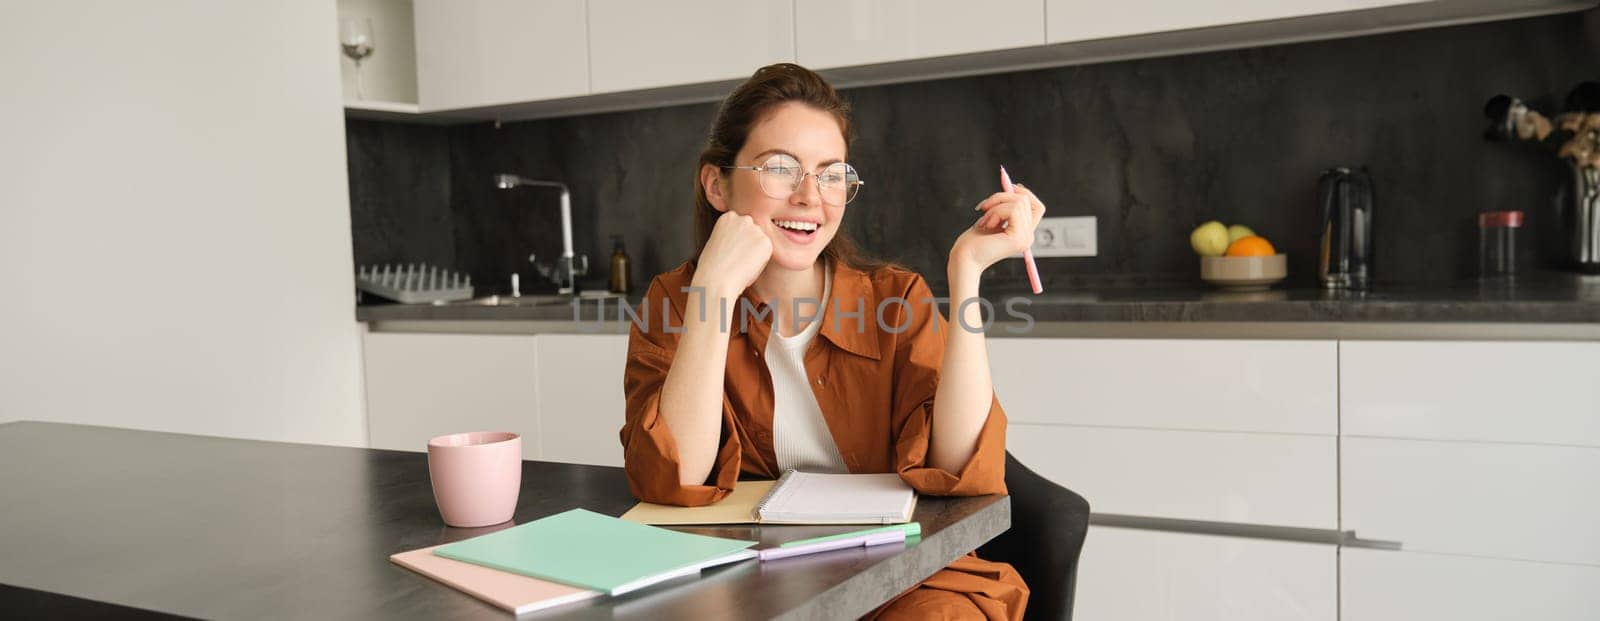 Portrait of young beautiful woman with pen, writing, student studying at home, doing homework, making notes, using her planner.